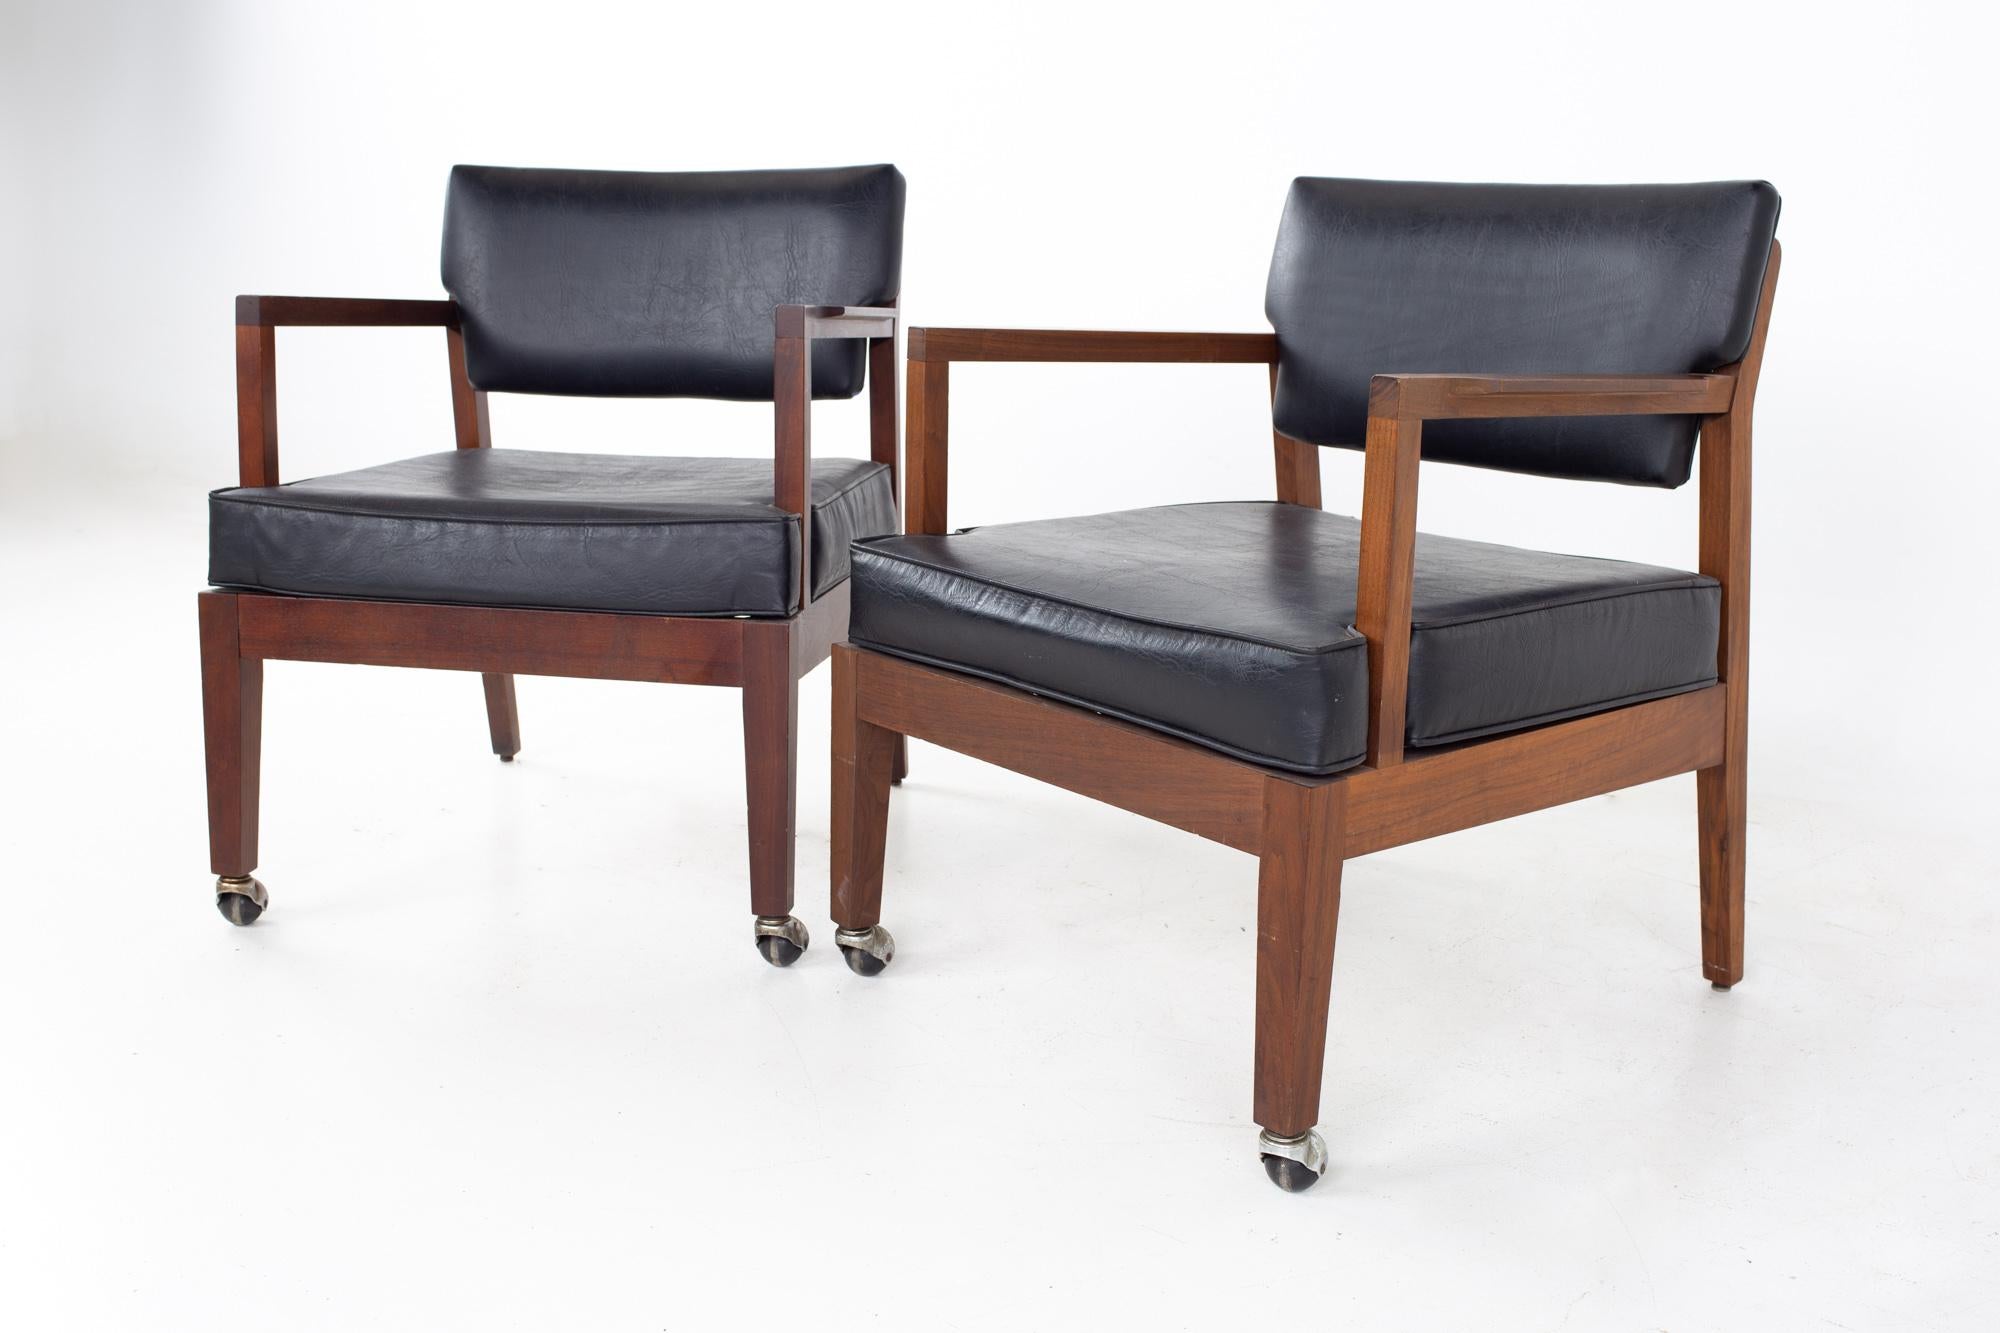 Mid century walnut occasional lounge chairs - A pair
Each chair measures: 24.25 wide x 25 deep x 29 high, with a seat height of 17 inches and arm height of 24.5

All pieces of furniture can be had in what we call restored vintage condition. That